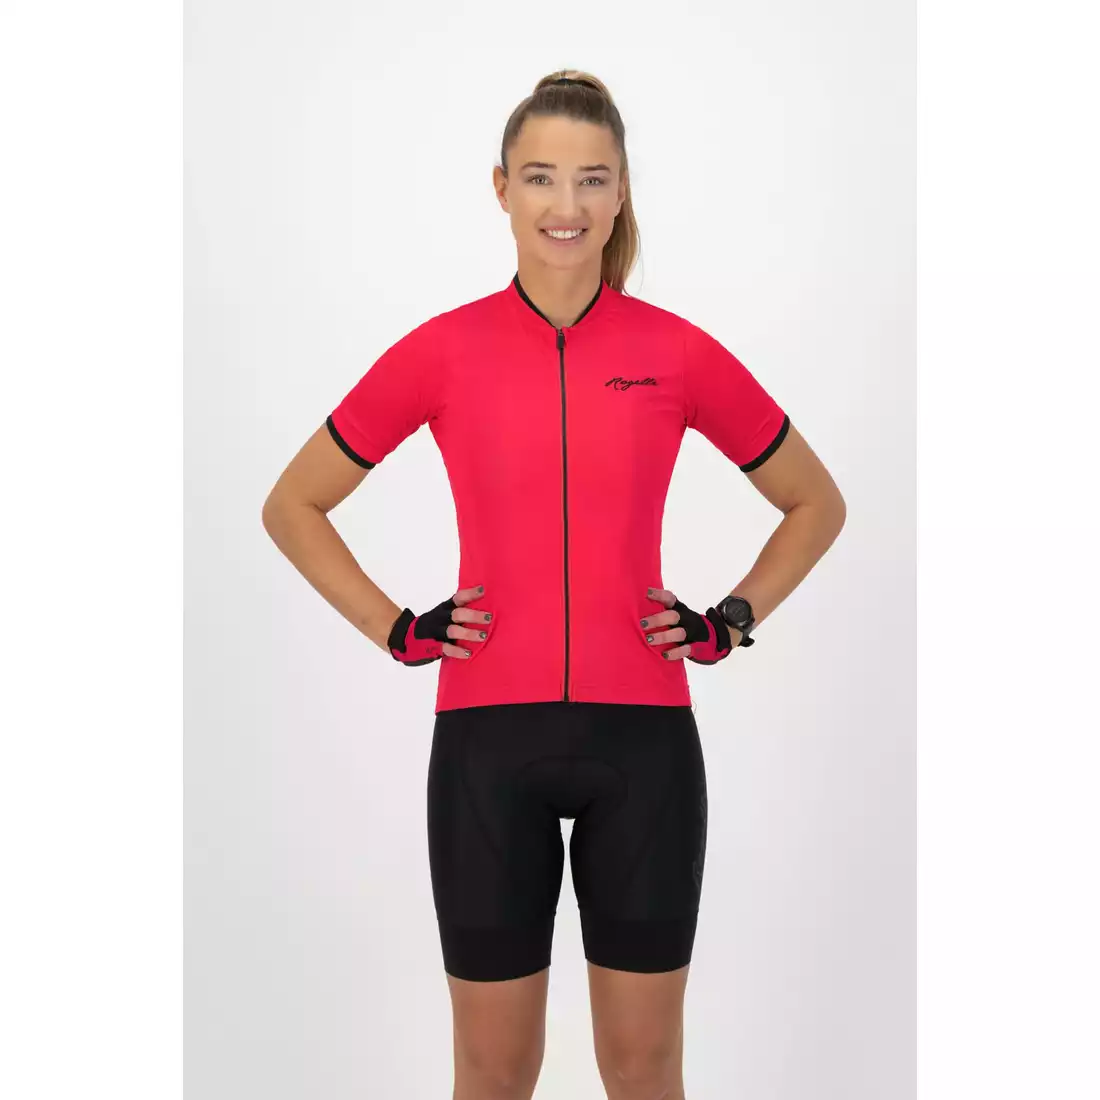 ROGELLI ESSENTIAL Women's cycling jersey, pink